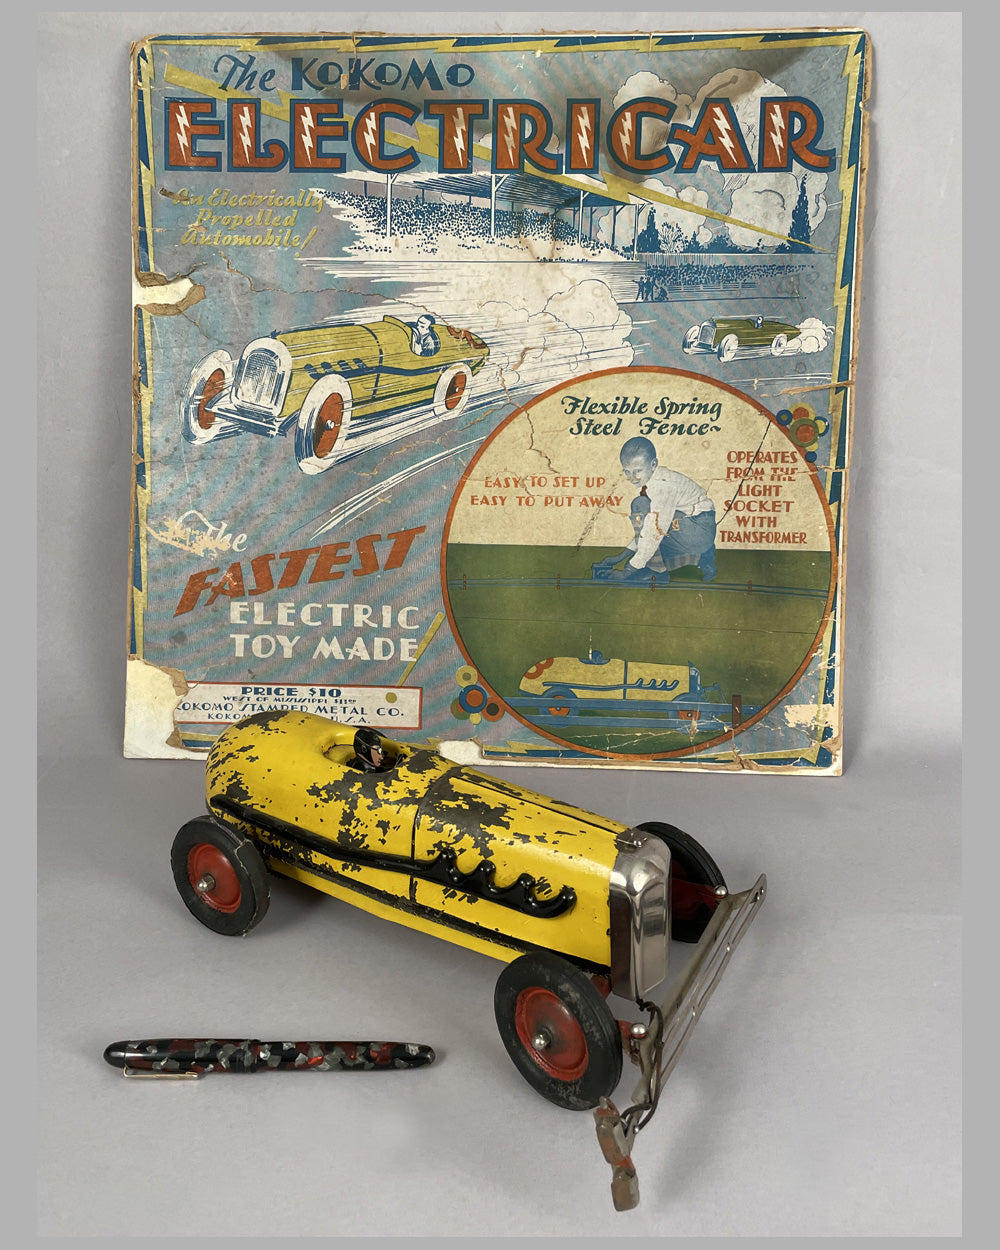 Kokomo Electricar race car and 2 sections of wired track (fence), early 1930's U.S.A.